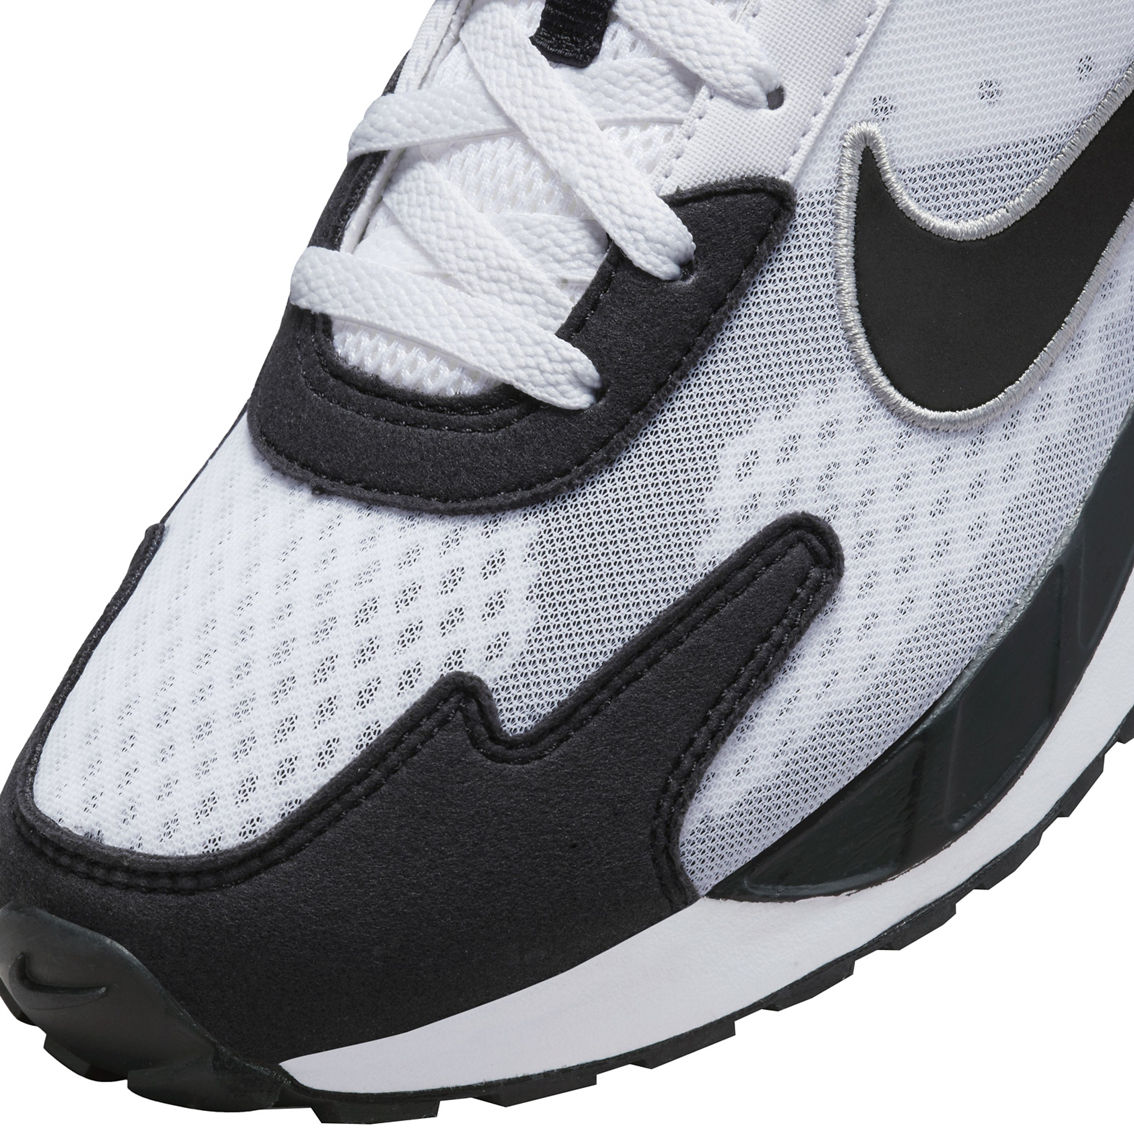 Nike Men's Air Max Solo Running Shoes - Image 7 of 10